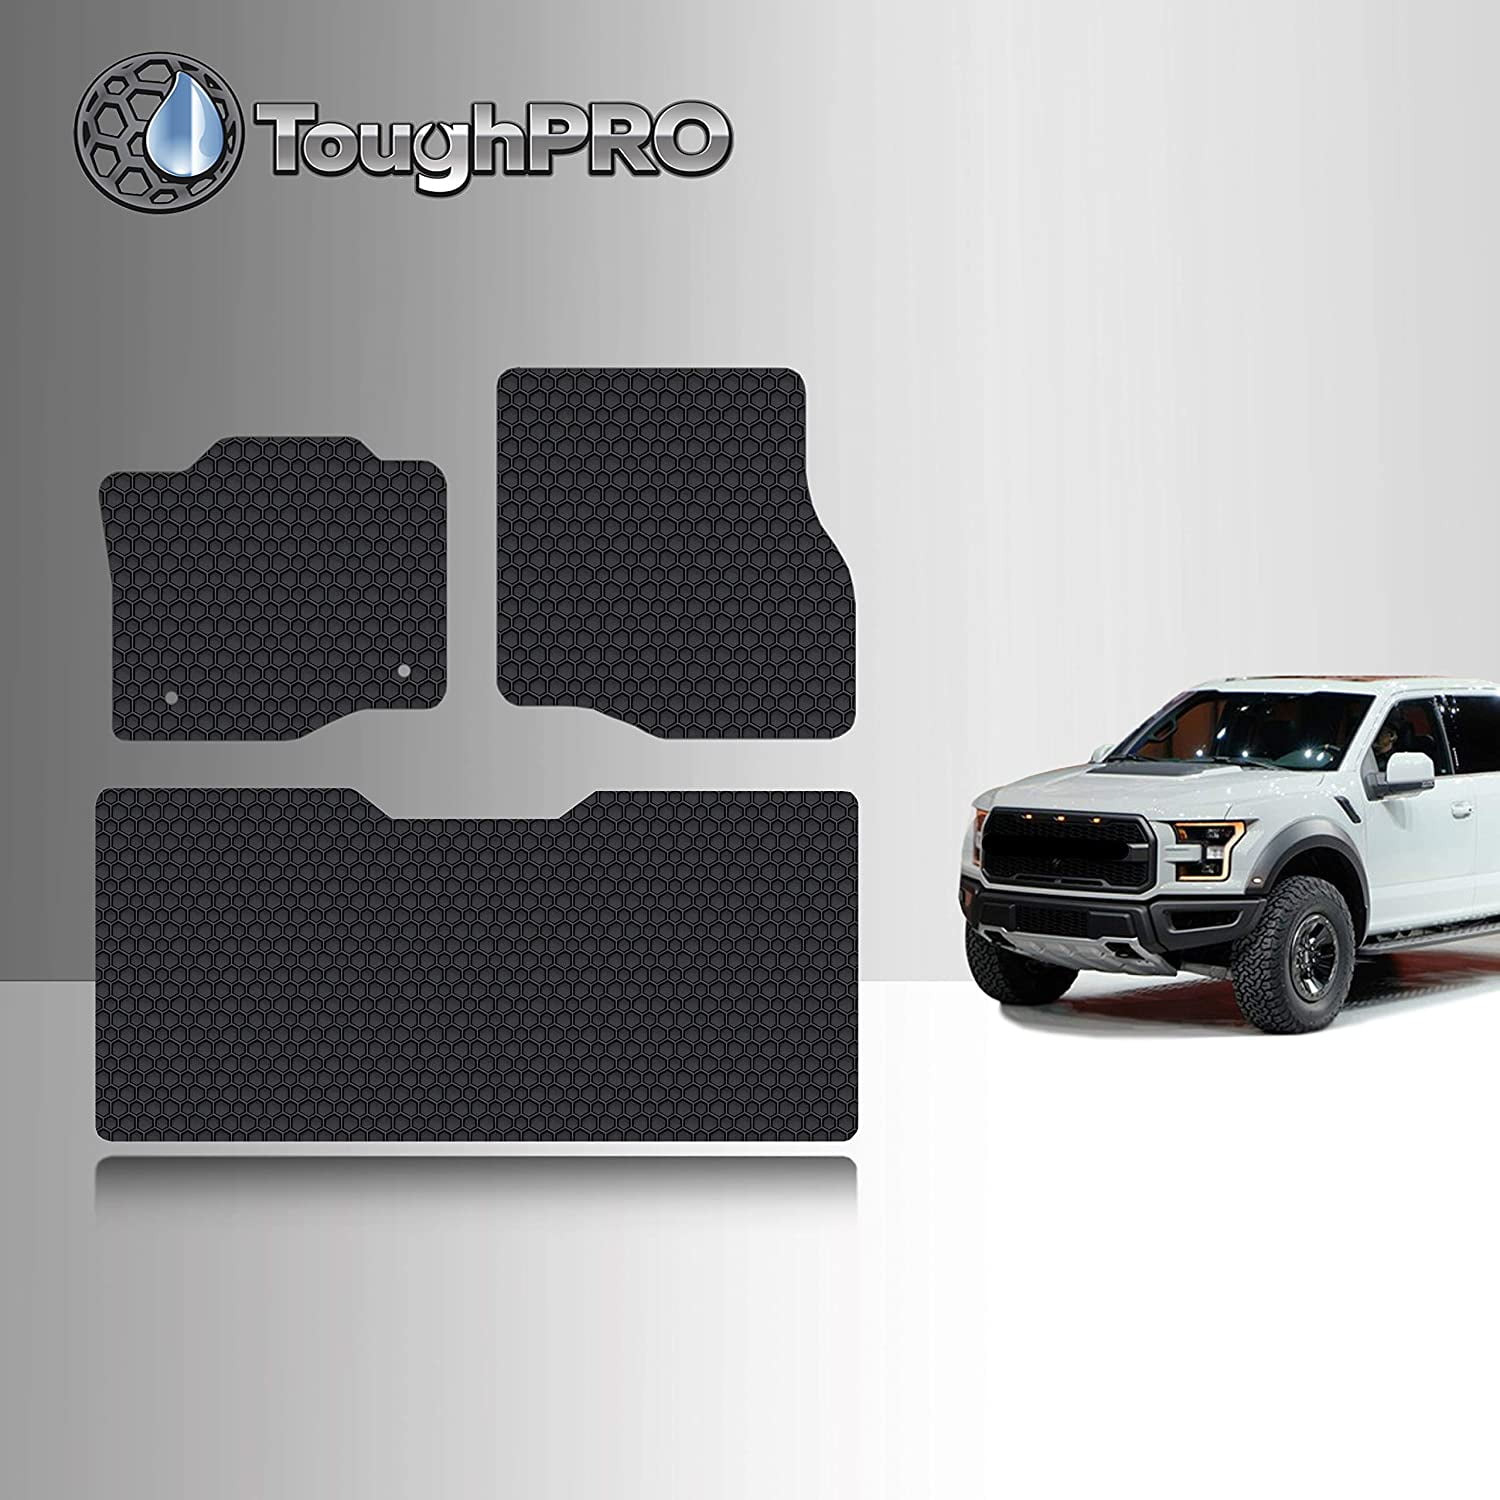 TOUGHPRO Floor Mat Accessories Set (Front Row + 2nd Row) Compatible with  Ford F-150 (Crew Cab) - All Weather - Heavy Duty - (Made in USA) - 2021